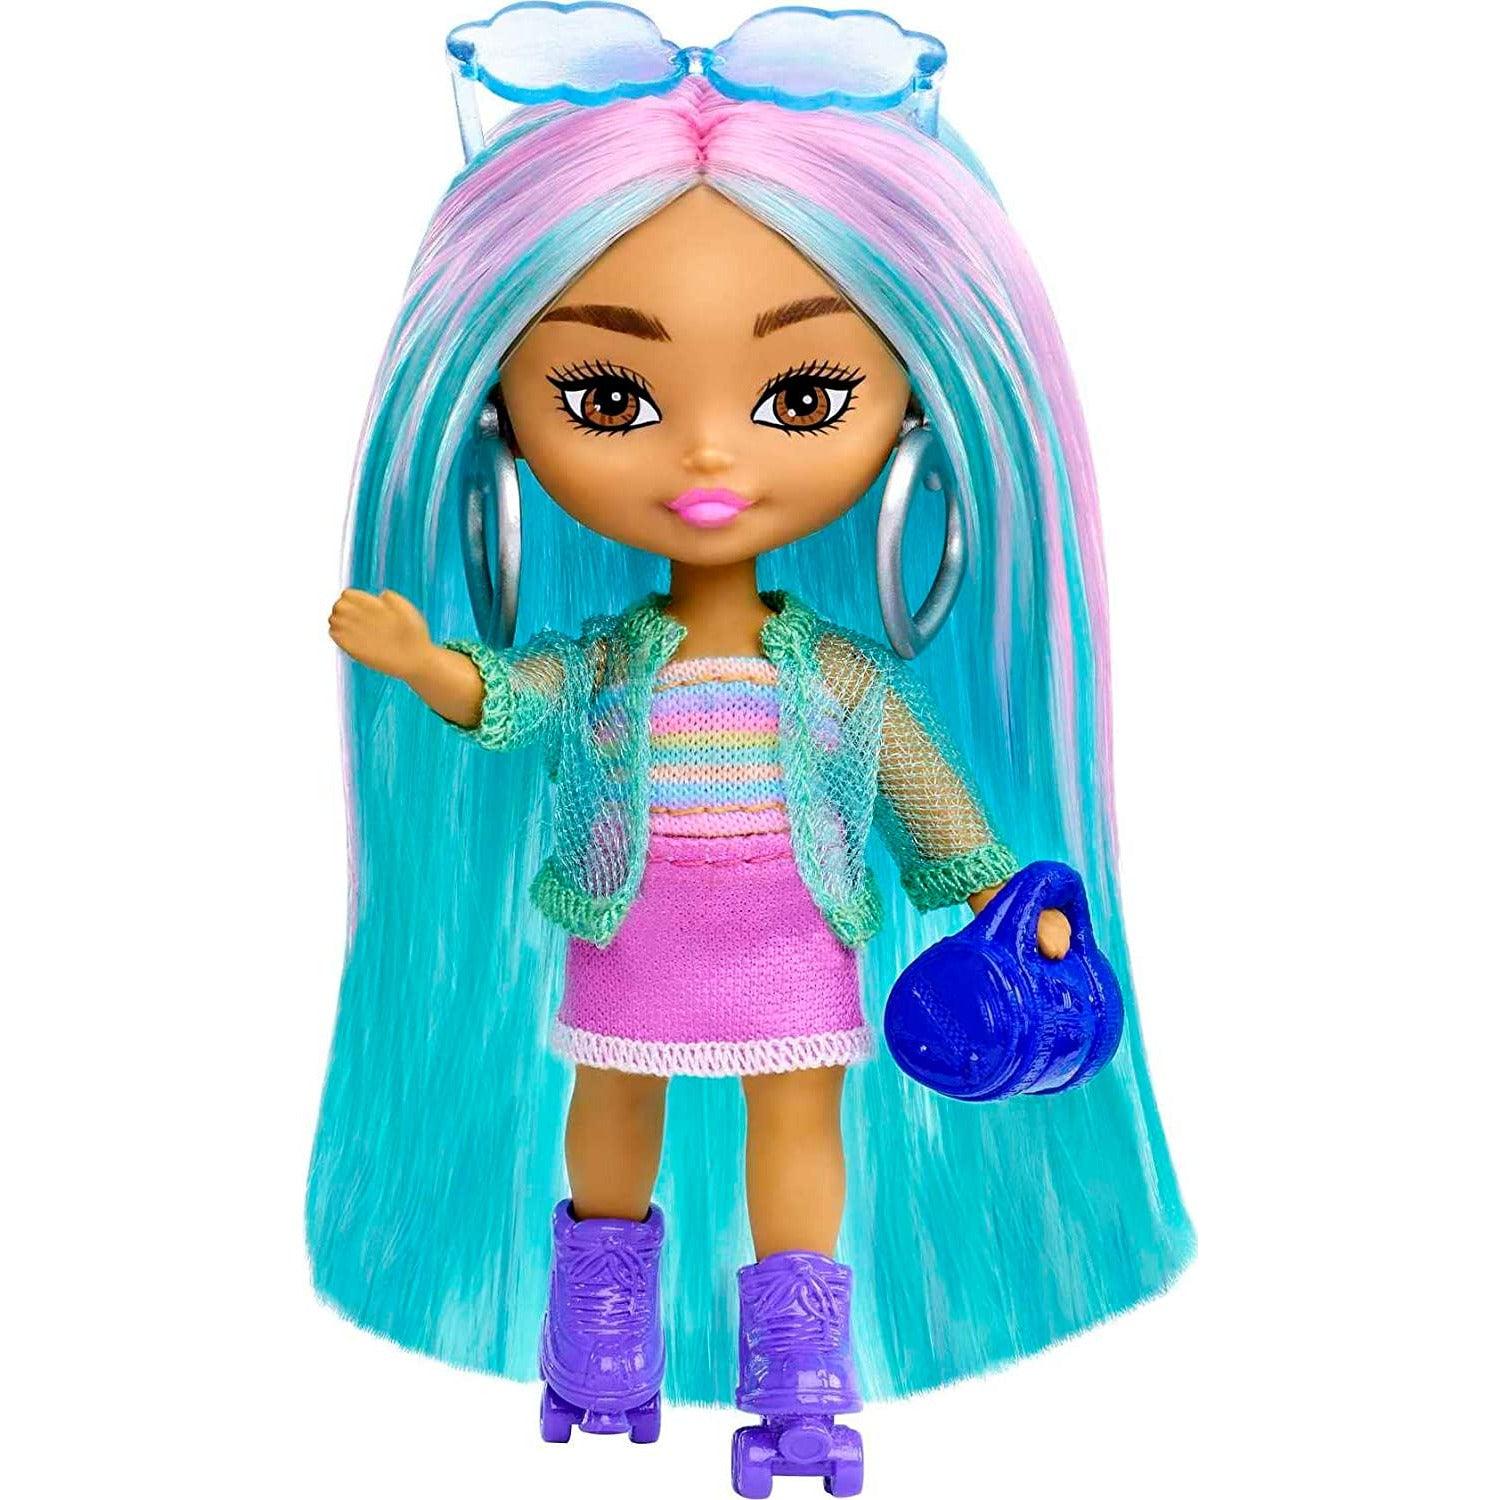 Barbie Extra Mini Minis Doll with Blue Hair, Sporty Outfit, Roller Skates & Accessories & Stand, 3.25-Inch - BumbleToys - 5-7 Years, Barbie, Barbie Extra, Dolls, Fashion Dolls & Accessories, Girls, Miniature Dolls & Accessories, OXE, Pre-Order